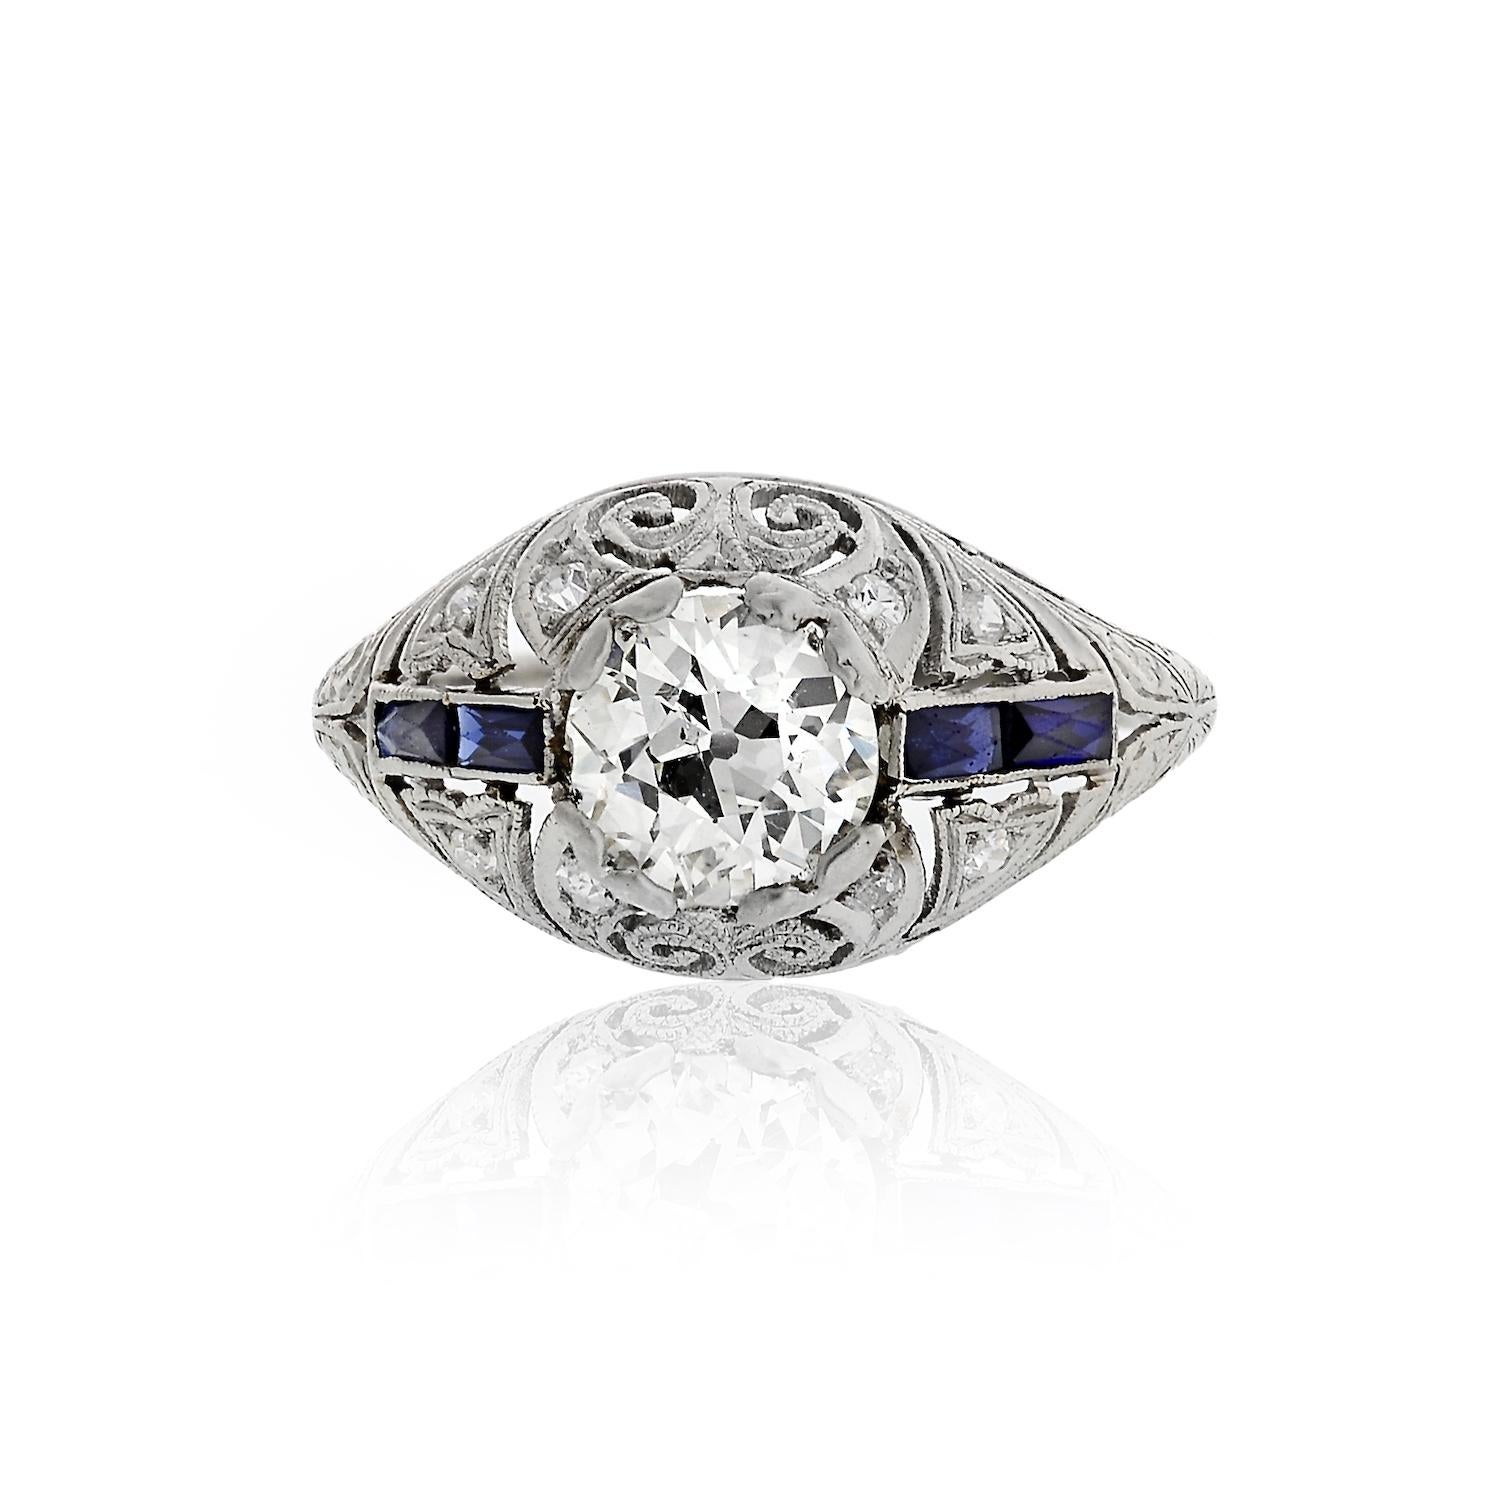 1.21 Carat Old European Cut diamond set in platinum in an Art Deco mounting with accent French-cut sapphires on the sides. 
The Center diamond weighs 1.21 carats and is of J-K color SI1 clarity. 
Size 7
Widest point 7mm.
Openwork filigree gives this